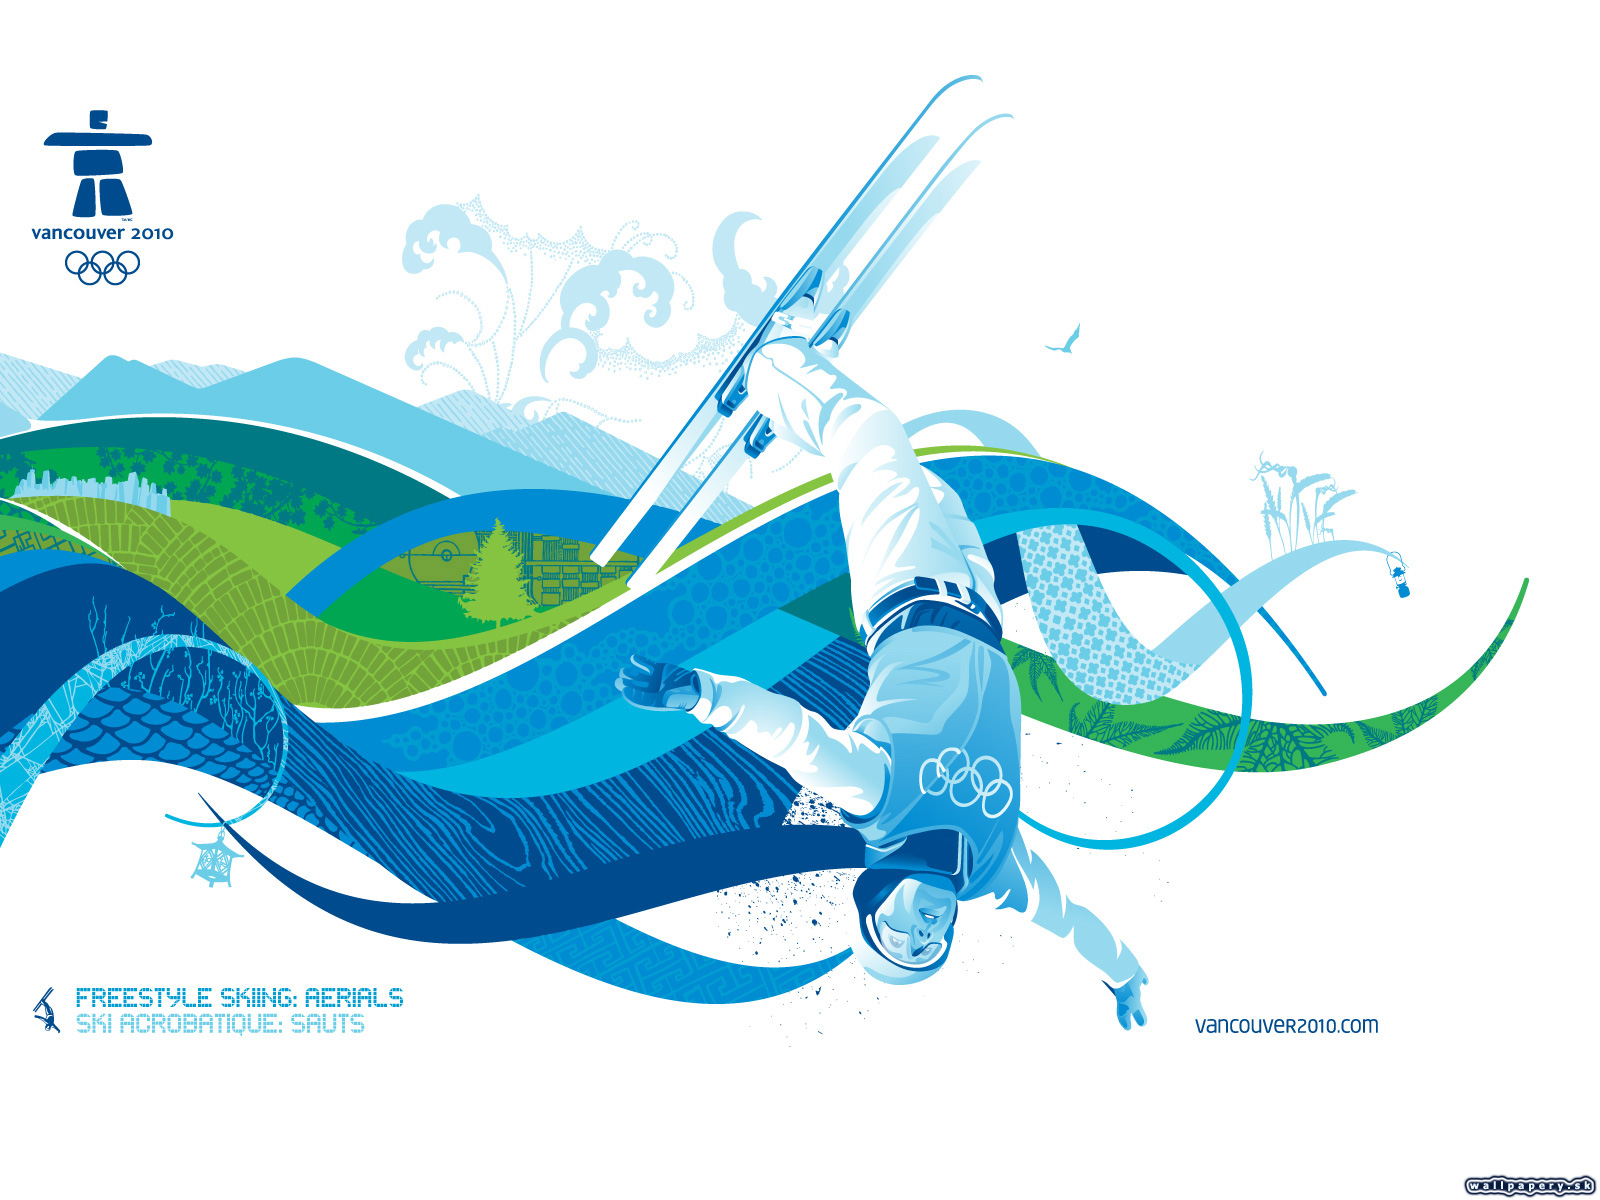 Vancouver 2010 - The Official Video Game of the Olympic Winter Games - wallpaper 27